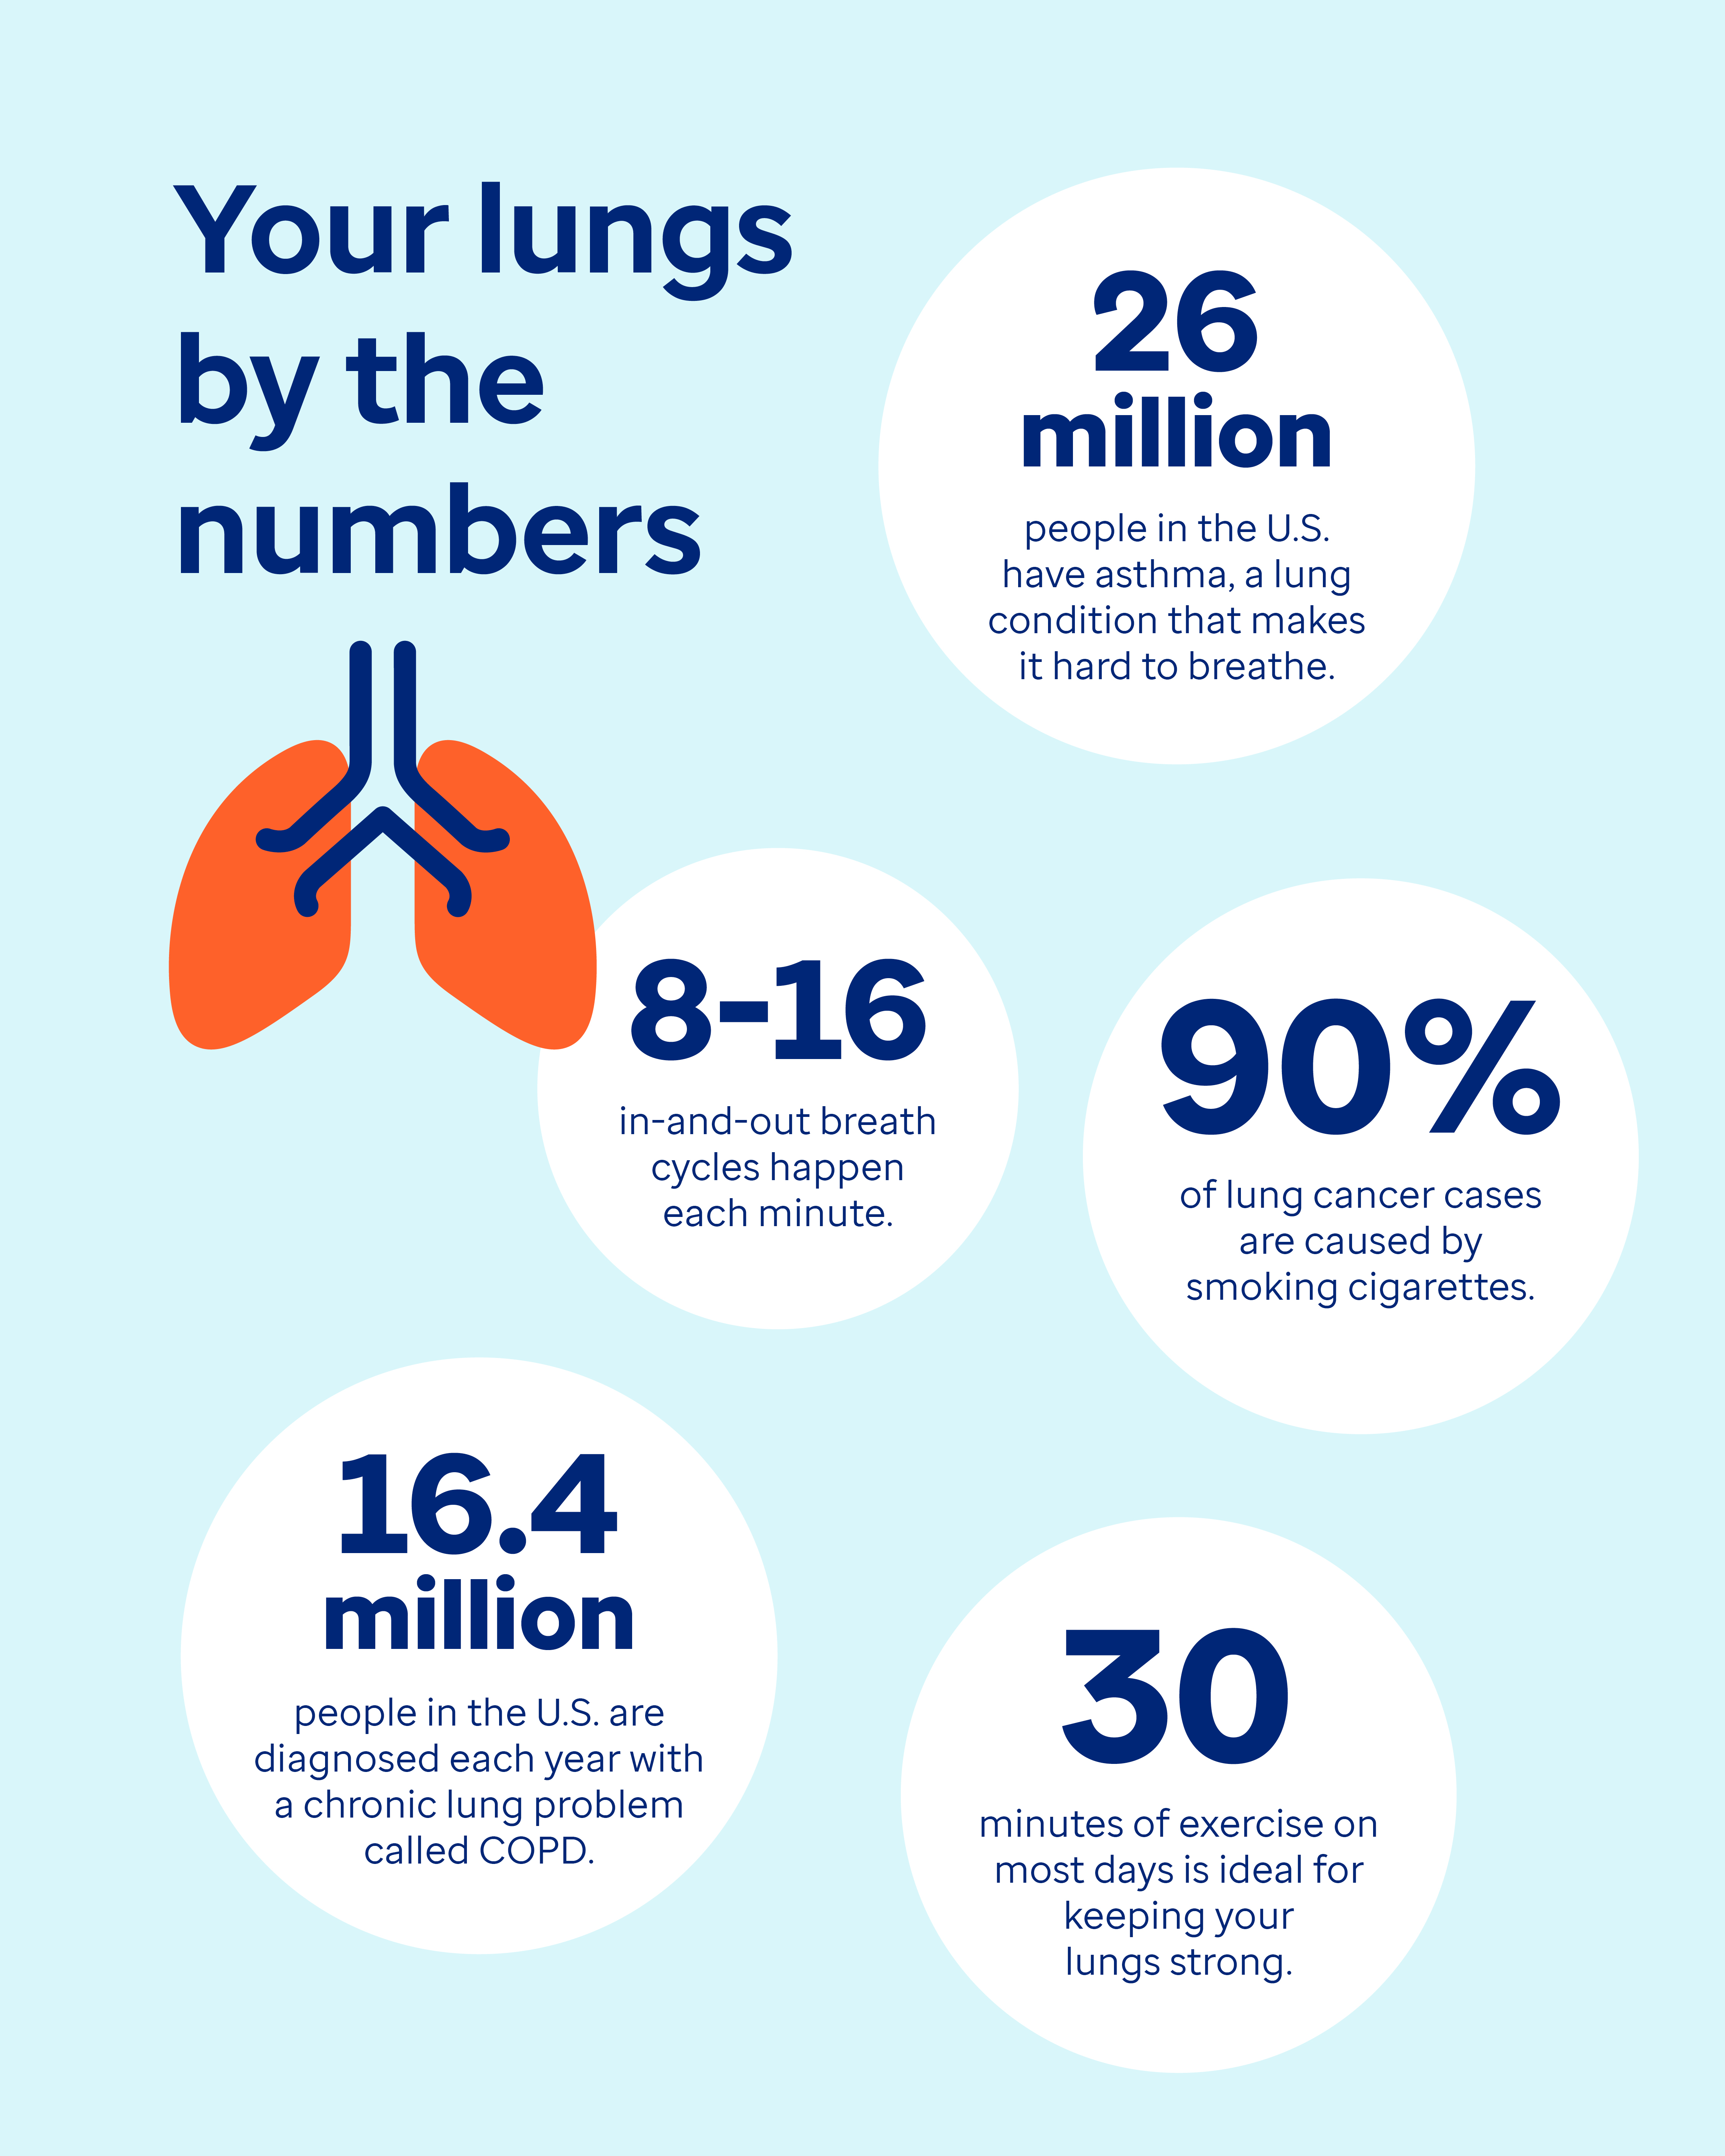 Your lungs by the numbers